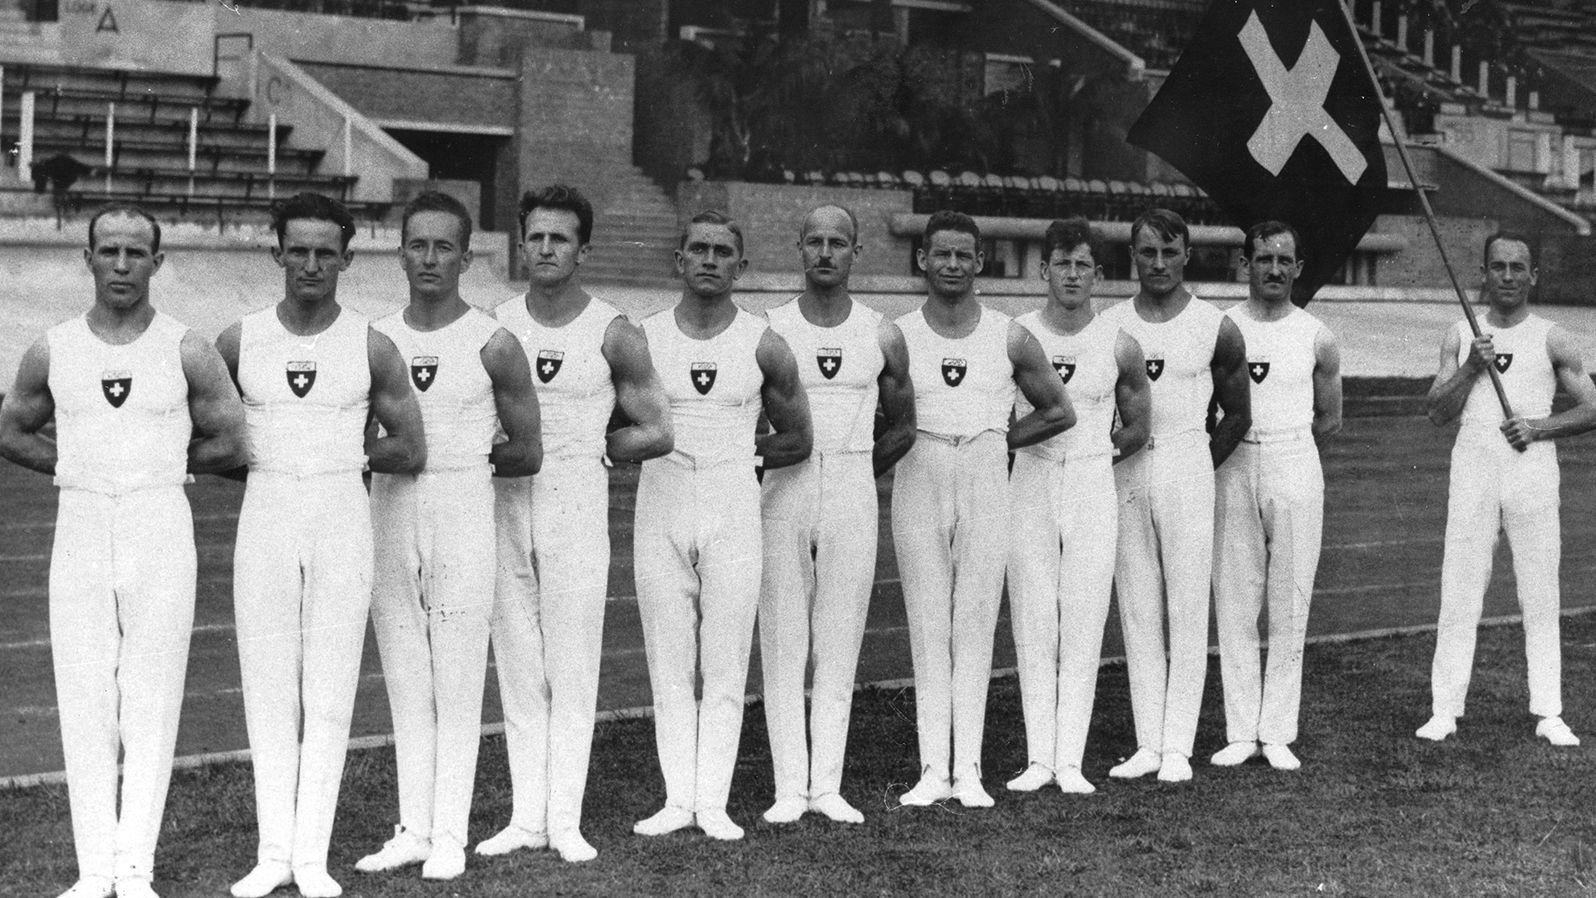 The Swiss men's gymnastics team at the 1928 Olympic Games in Amsterdam.